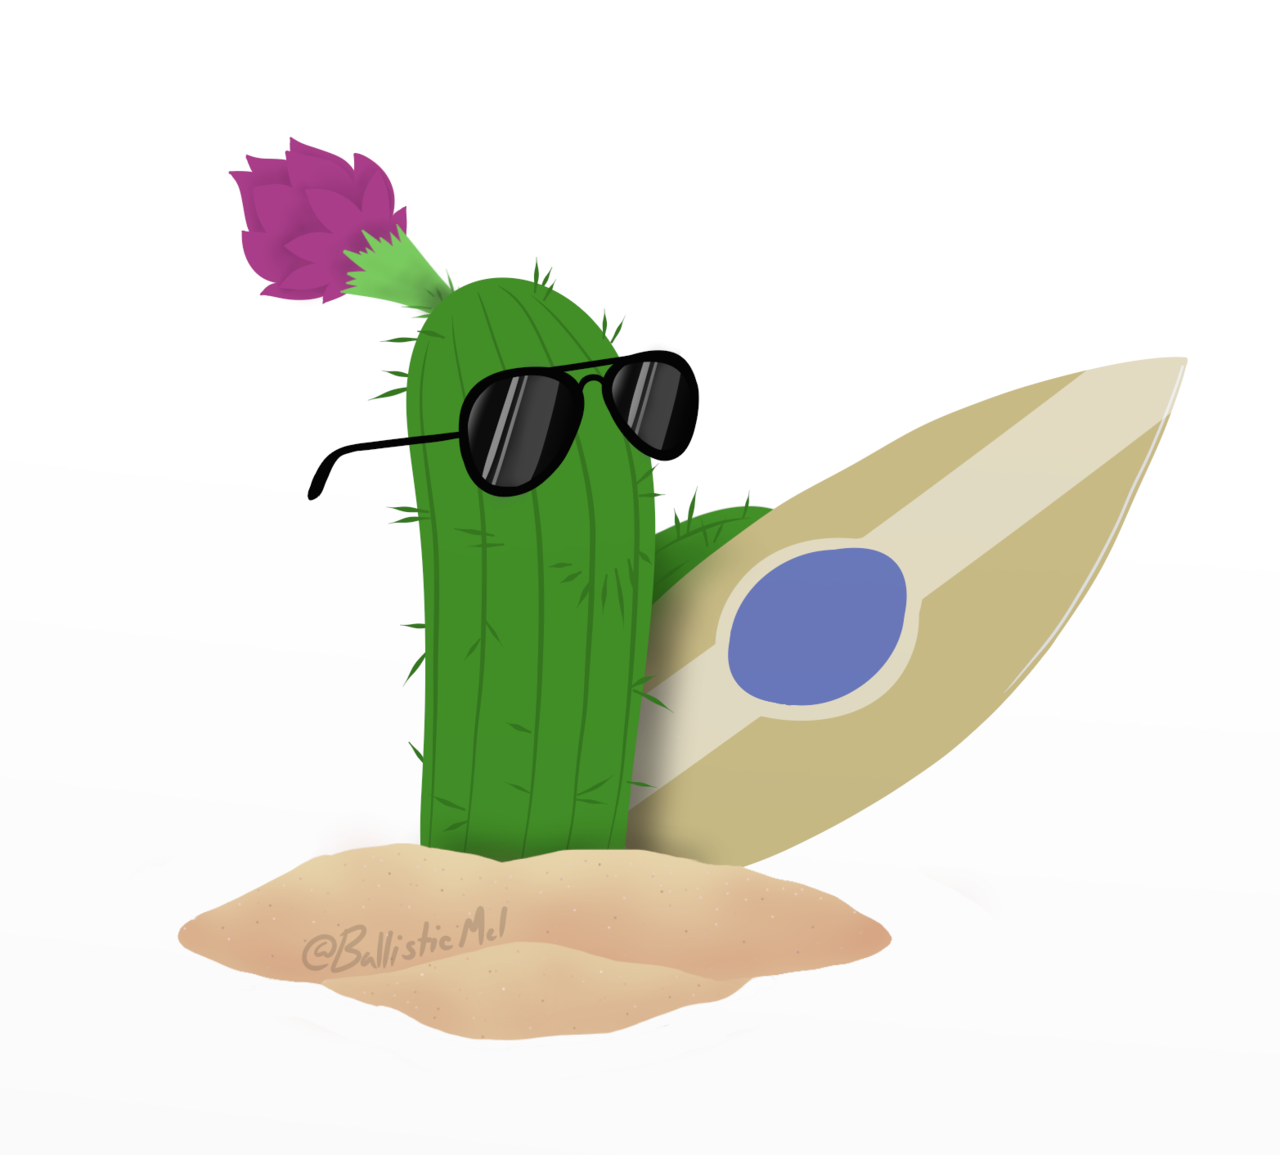 Anyone want a COOL COOL CACTUS?I would totally wear this on a shirt lolFollow me